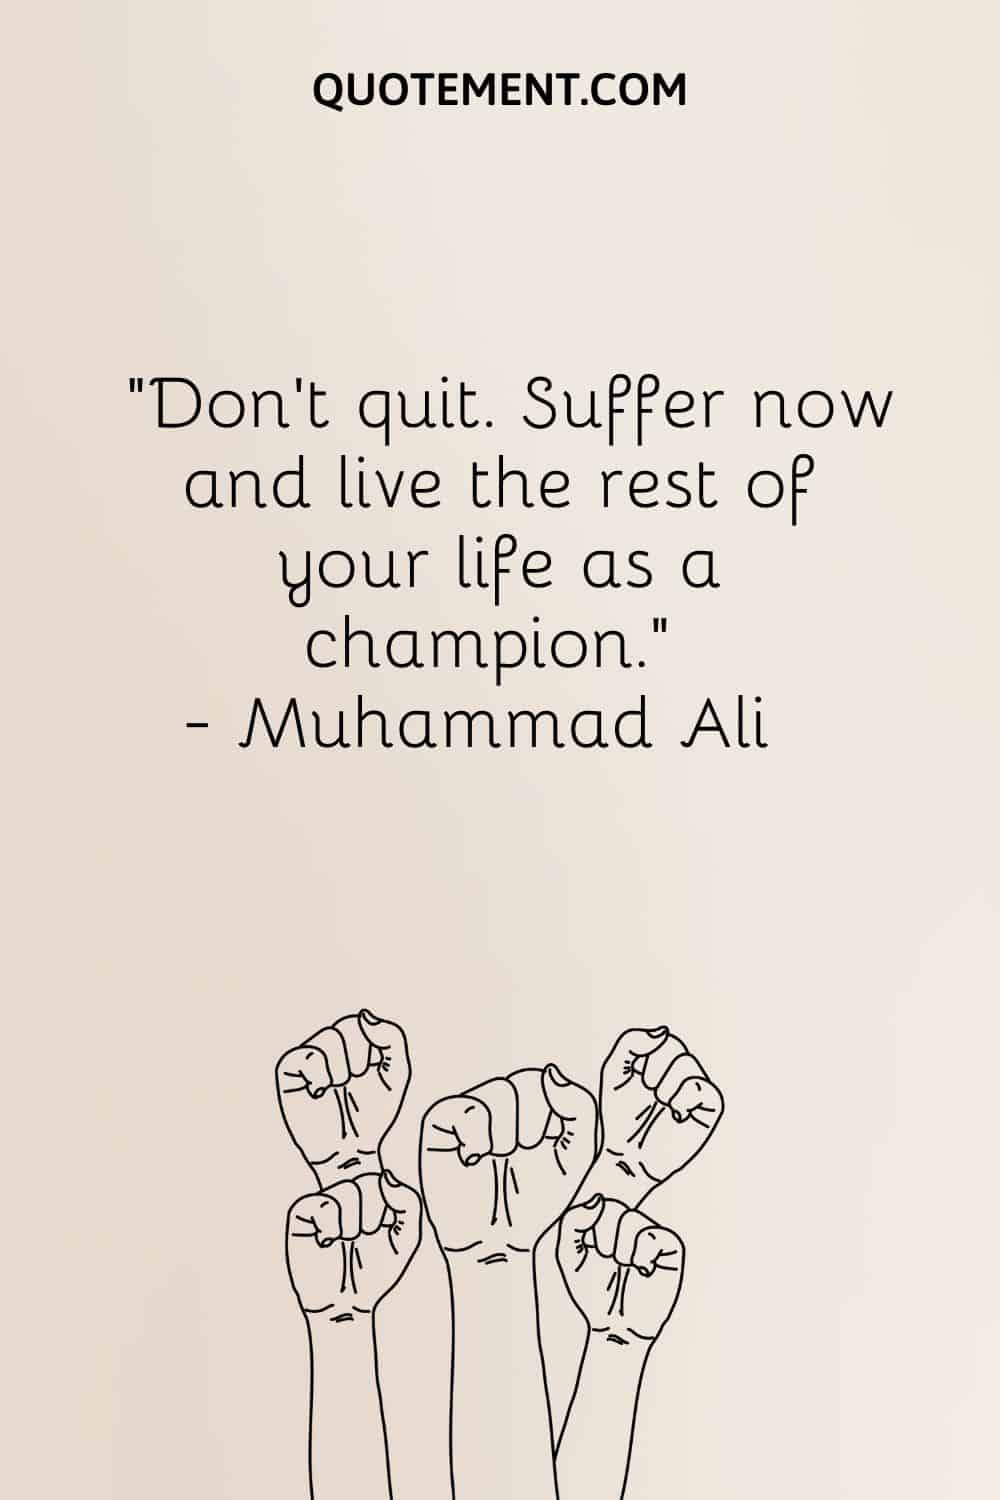 Don’t quit. Suffer now and live the rest of your life as a champion